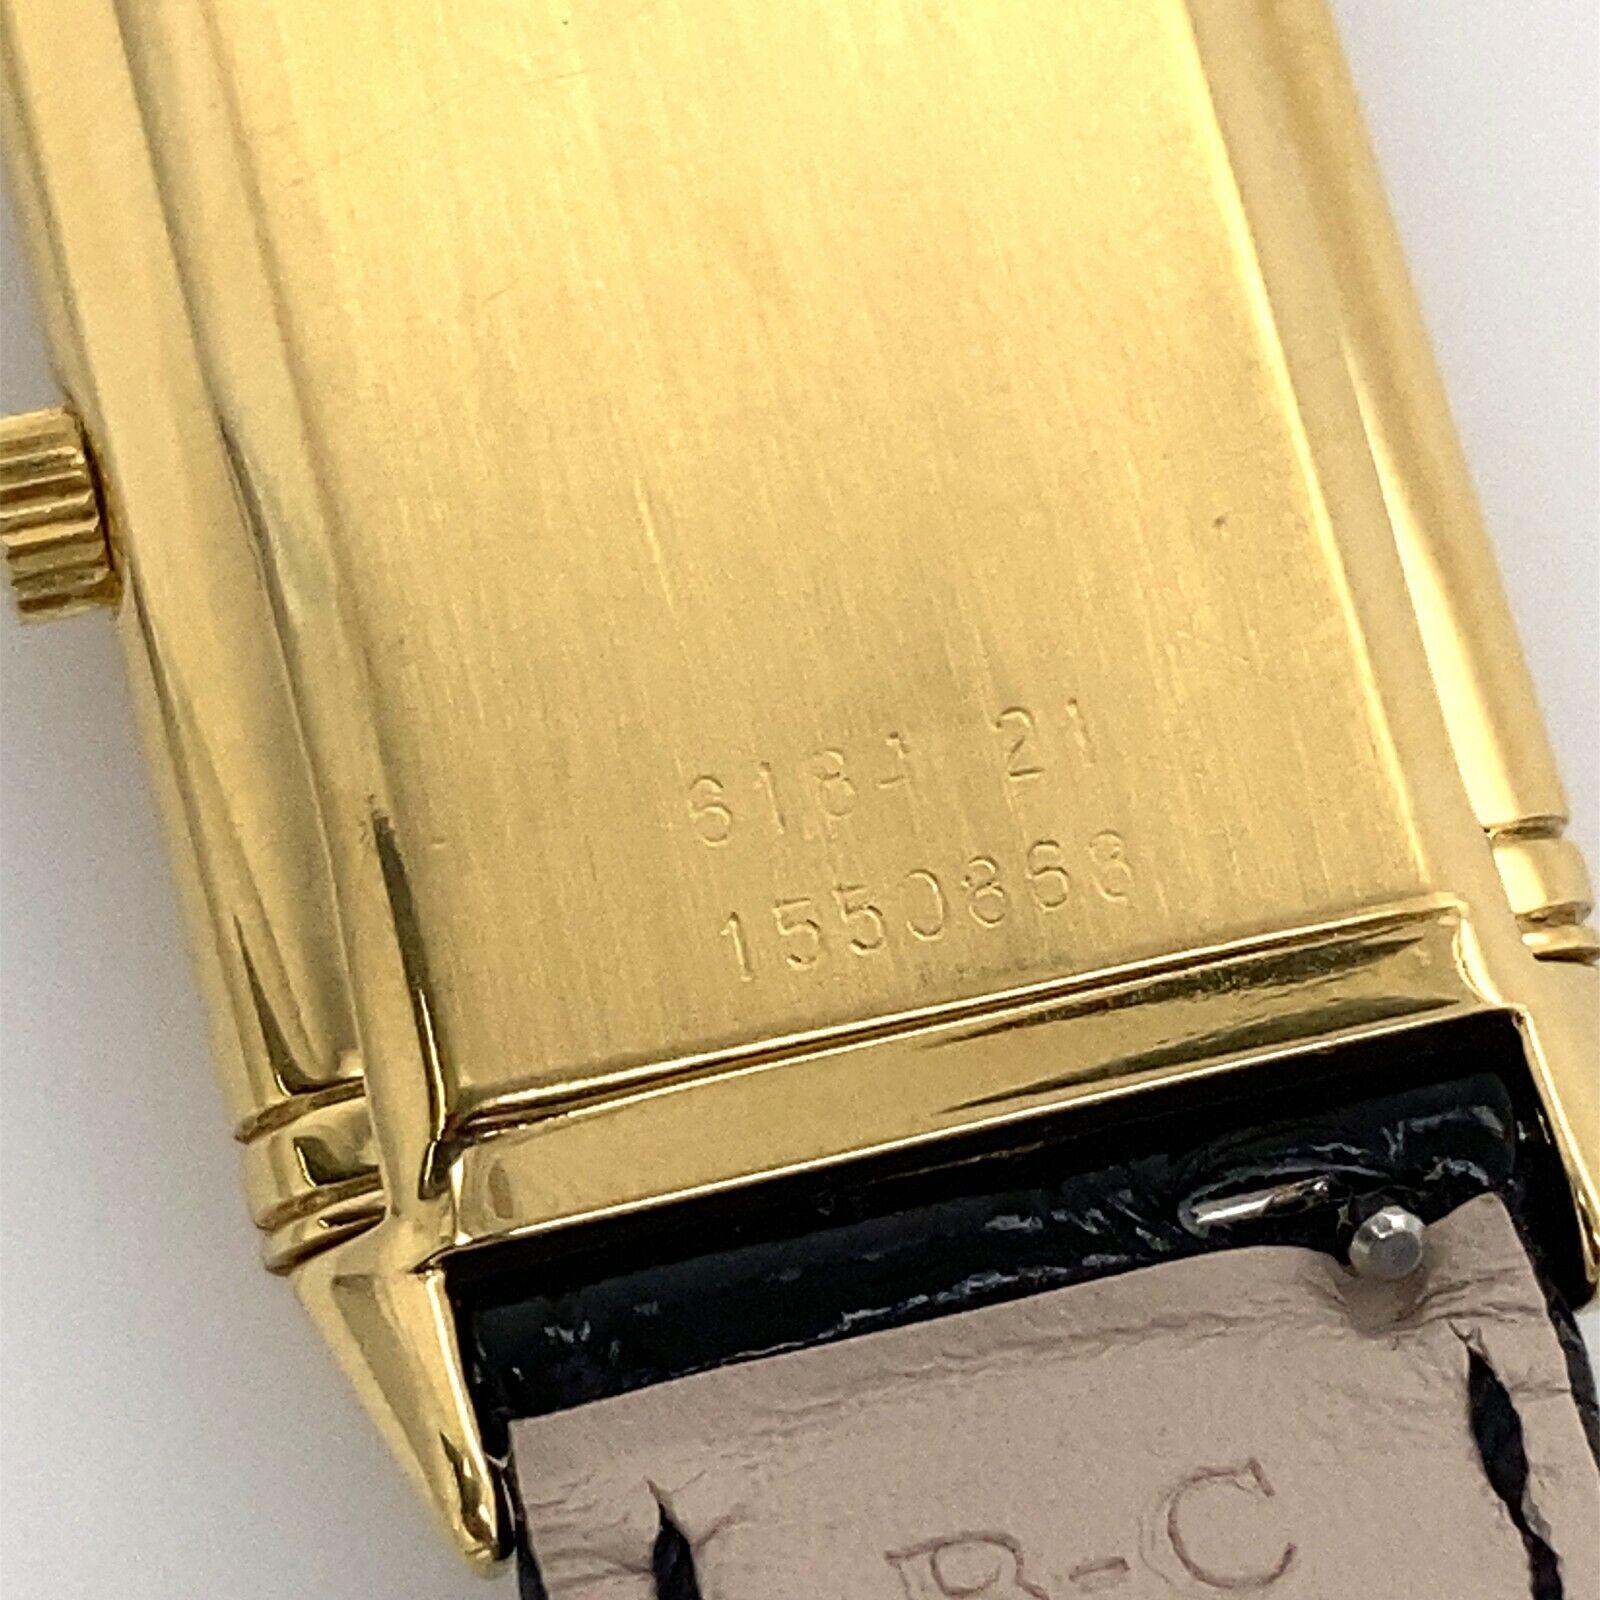 Unisex Jaeger-Le Coultre Reverso Classique Watch S18421 in 18ct Yellow Gold For Sale 2